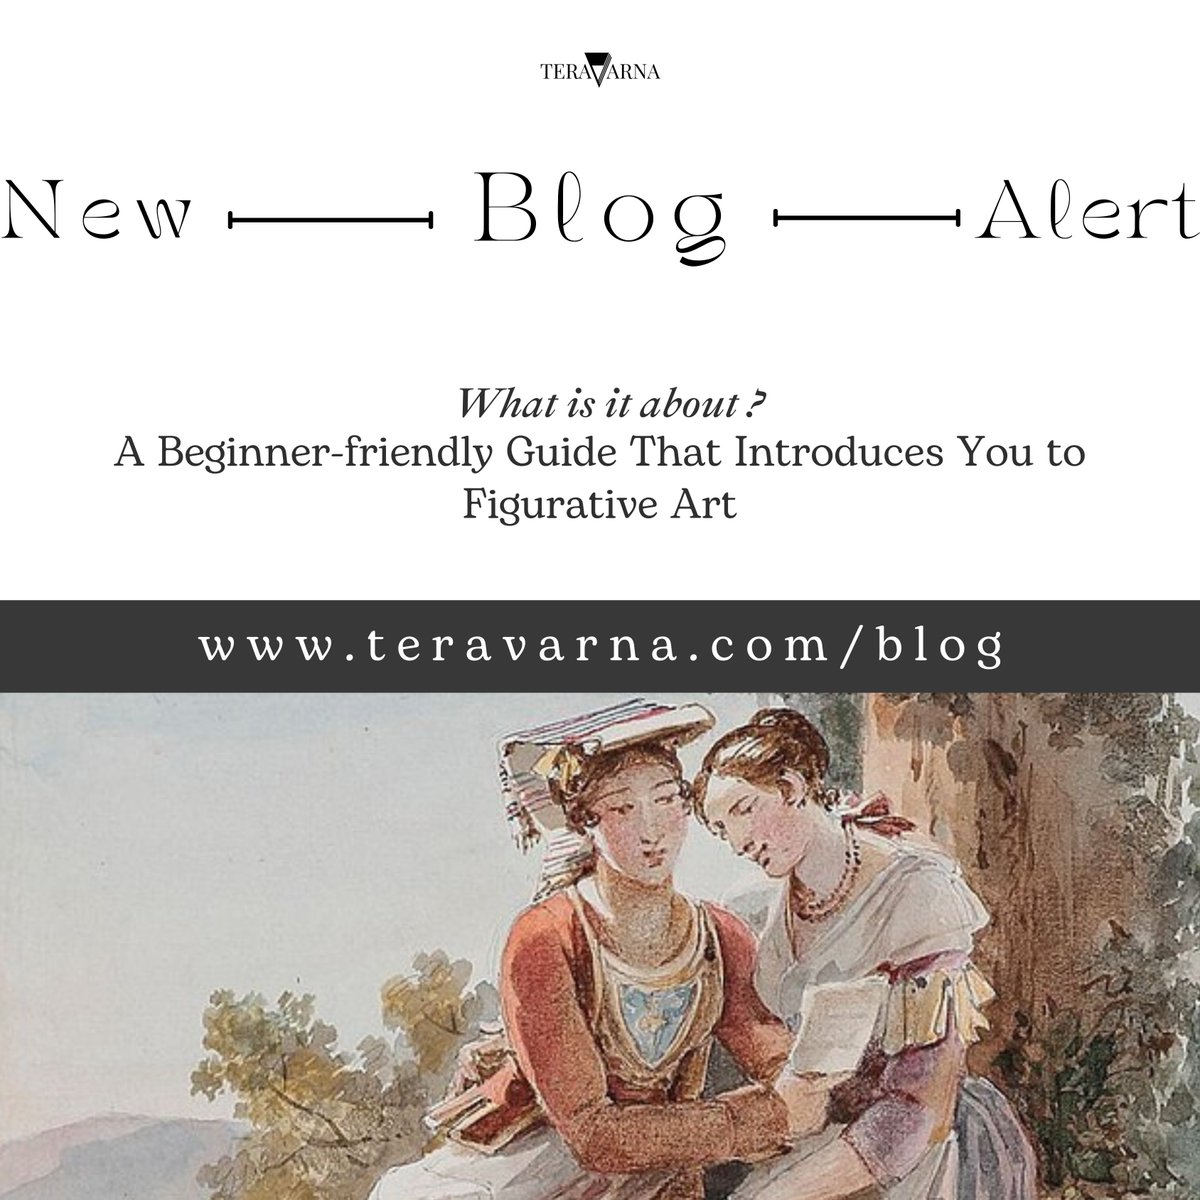 Figurative art depicts recognizable subjects, often the human form.
Blog: A Beginner-friendly Guide That Introduces You to Figurative Art

teravarna.com/post/a-beginne…
.
.
.
.
.
blogs, art blogs, art tips, artist insights, art info, figurative art
#teravarnagallery #teravarnablogs